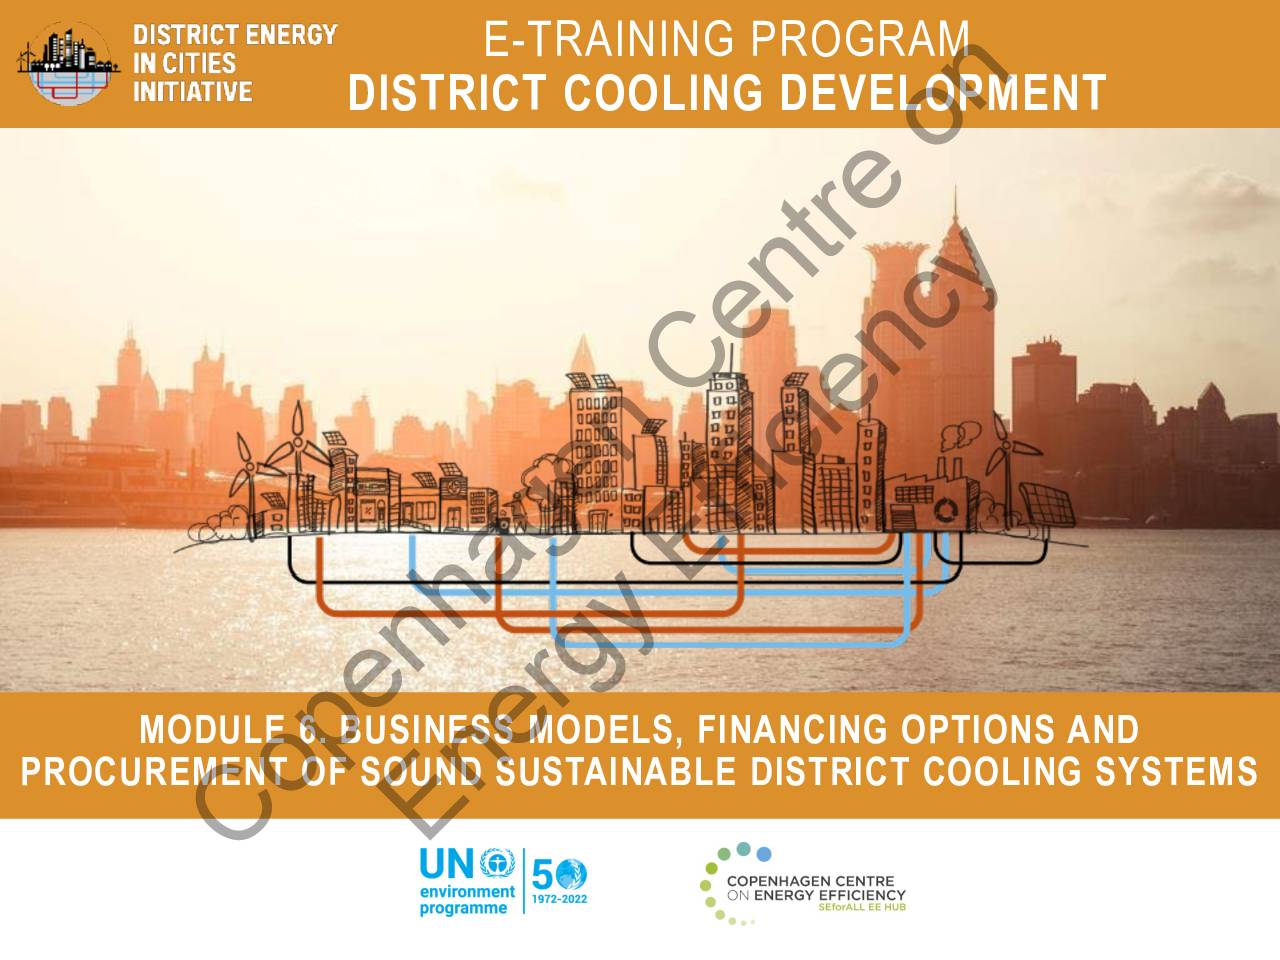 Module 6 – Business models, financing options and procurement of sound sustainable District Cooling Systems